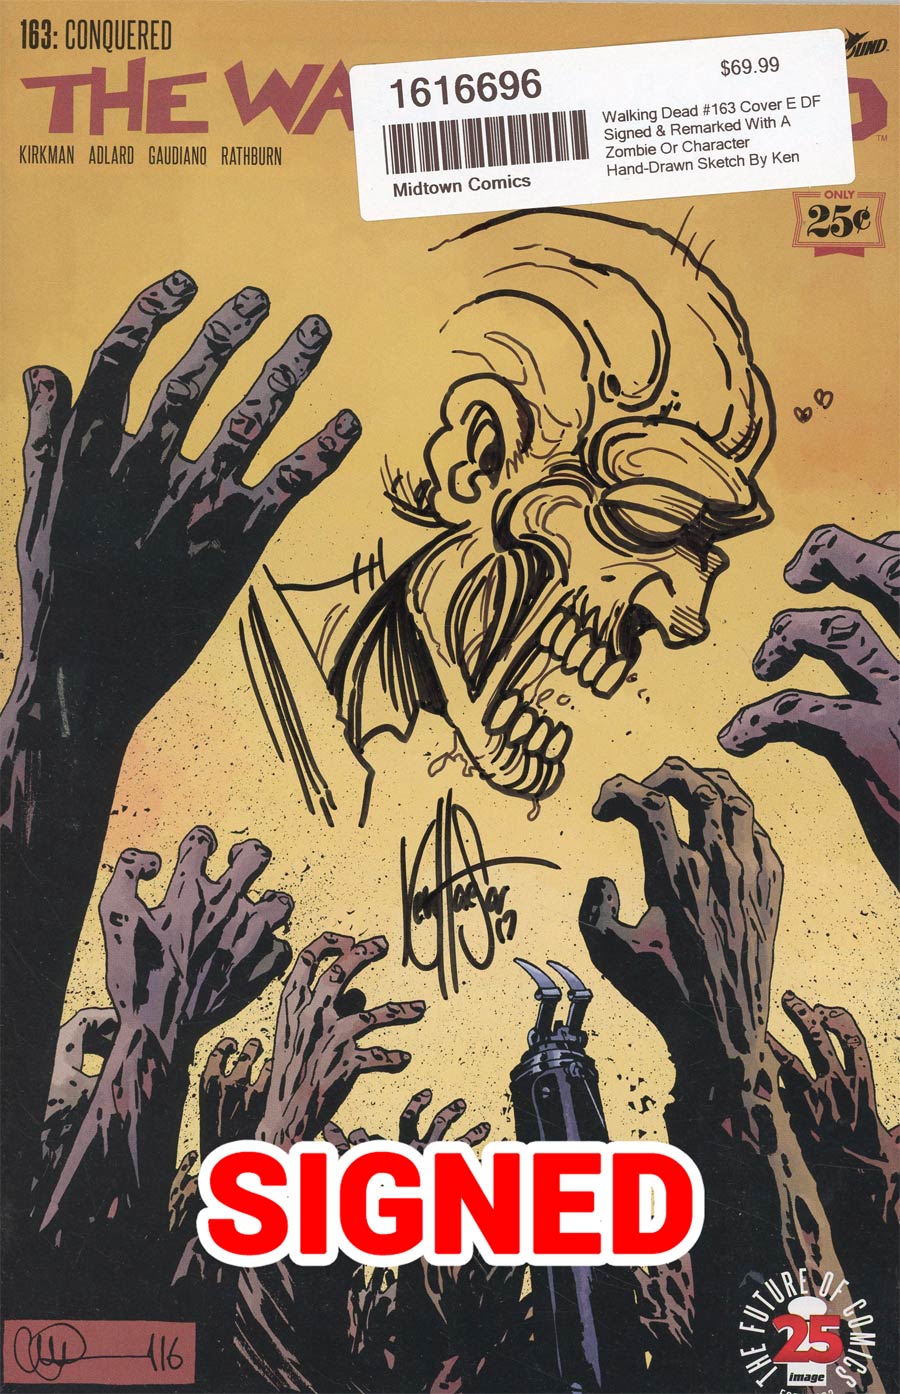 Walking Dead #163 Cover E DF Signed & Remarked With A Zombie Or Character Hand-Drawn Sketch By Ken Haeser (Filled Randomly)